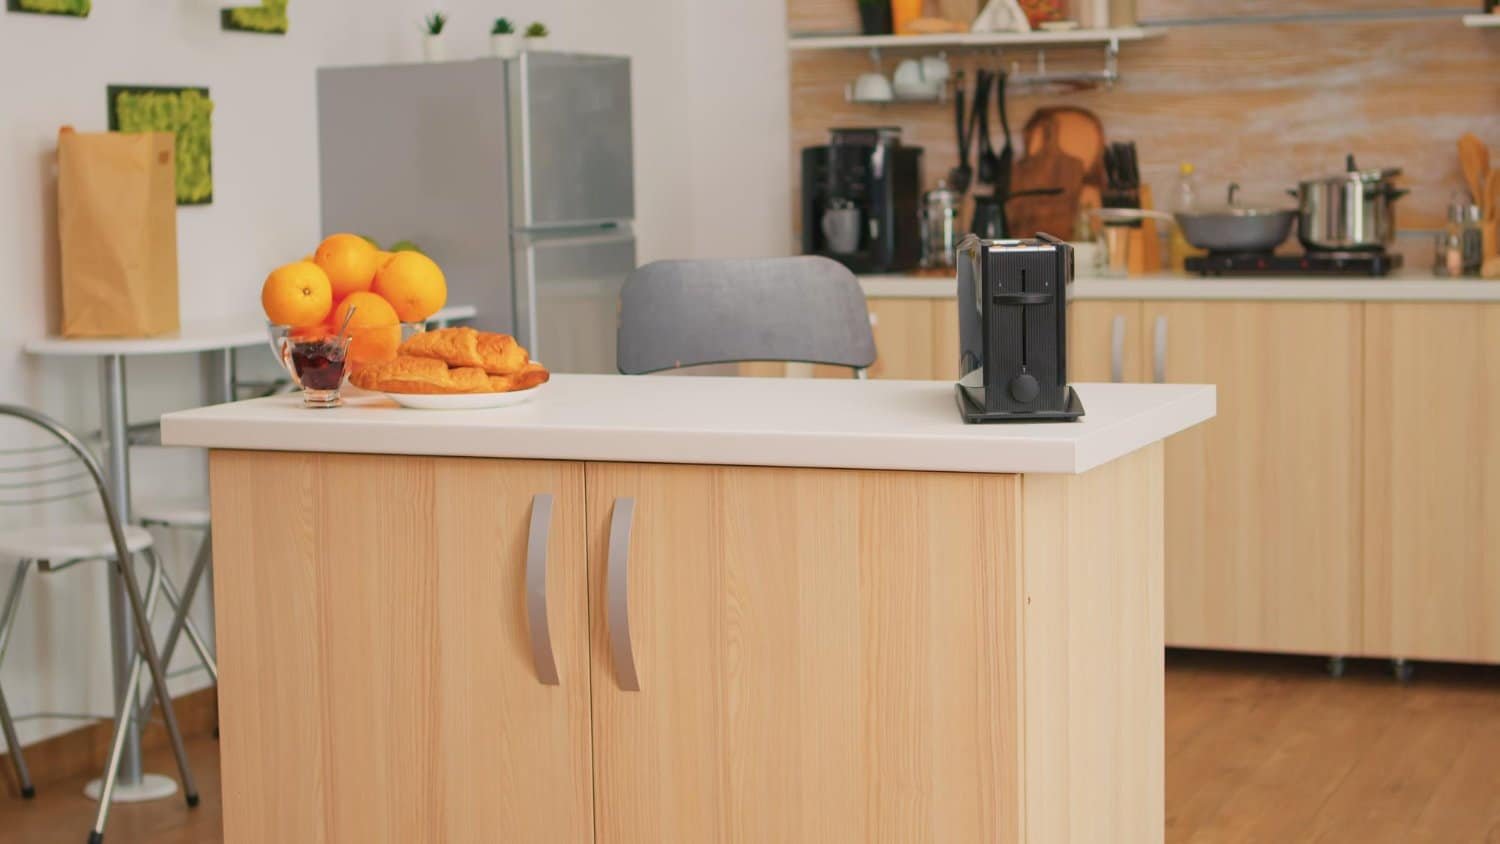 Read more about the article Kitchen Appliances: Smart and Energy-Efficient Options